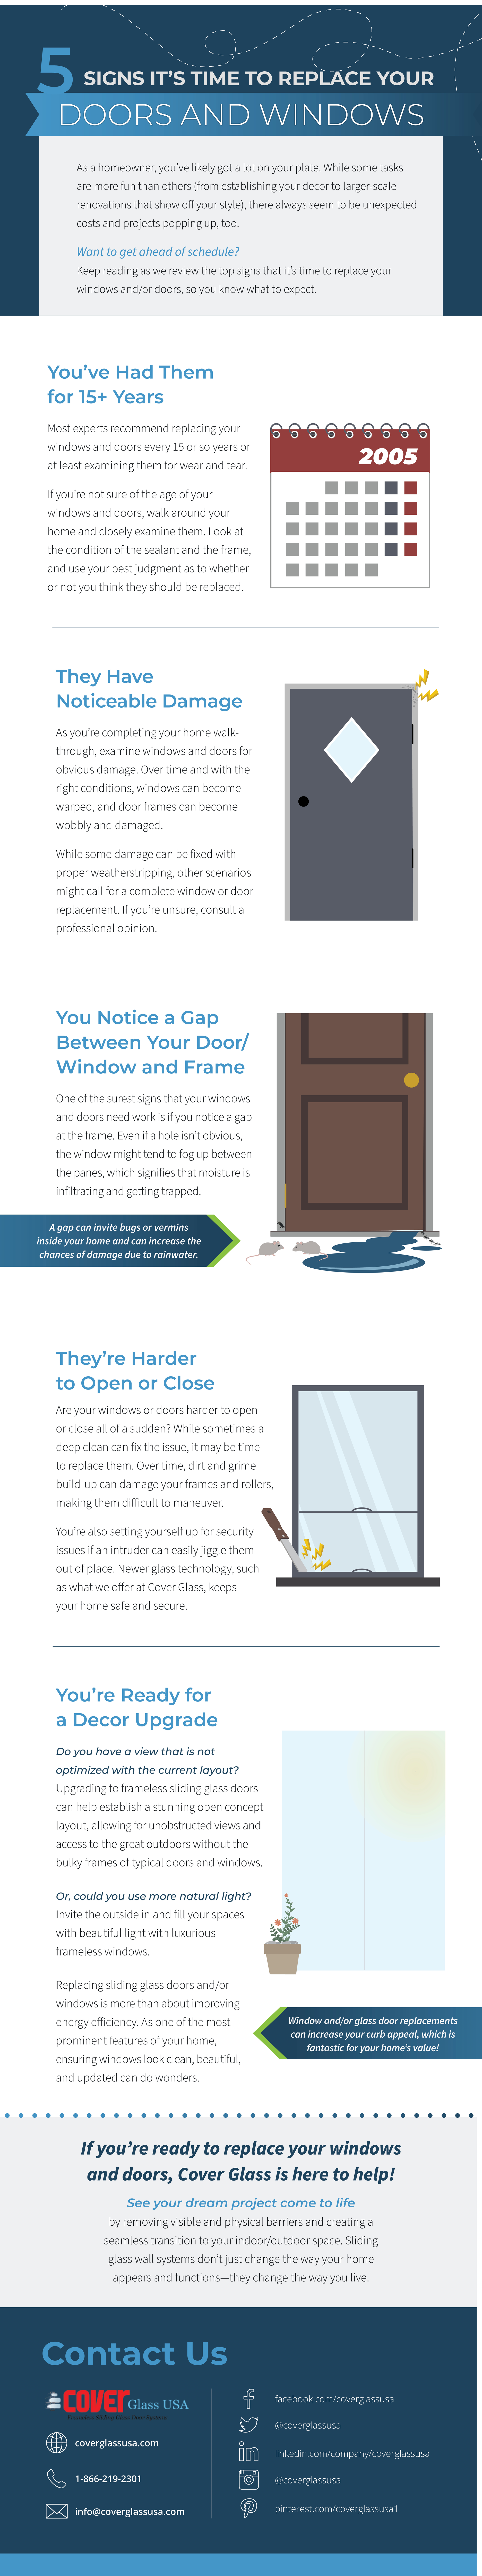 5 Signs it's Time to Replace Windows and Doors infographic